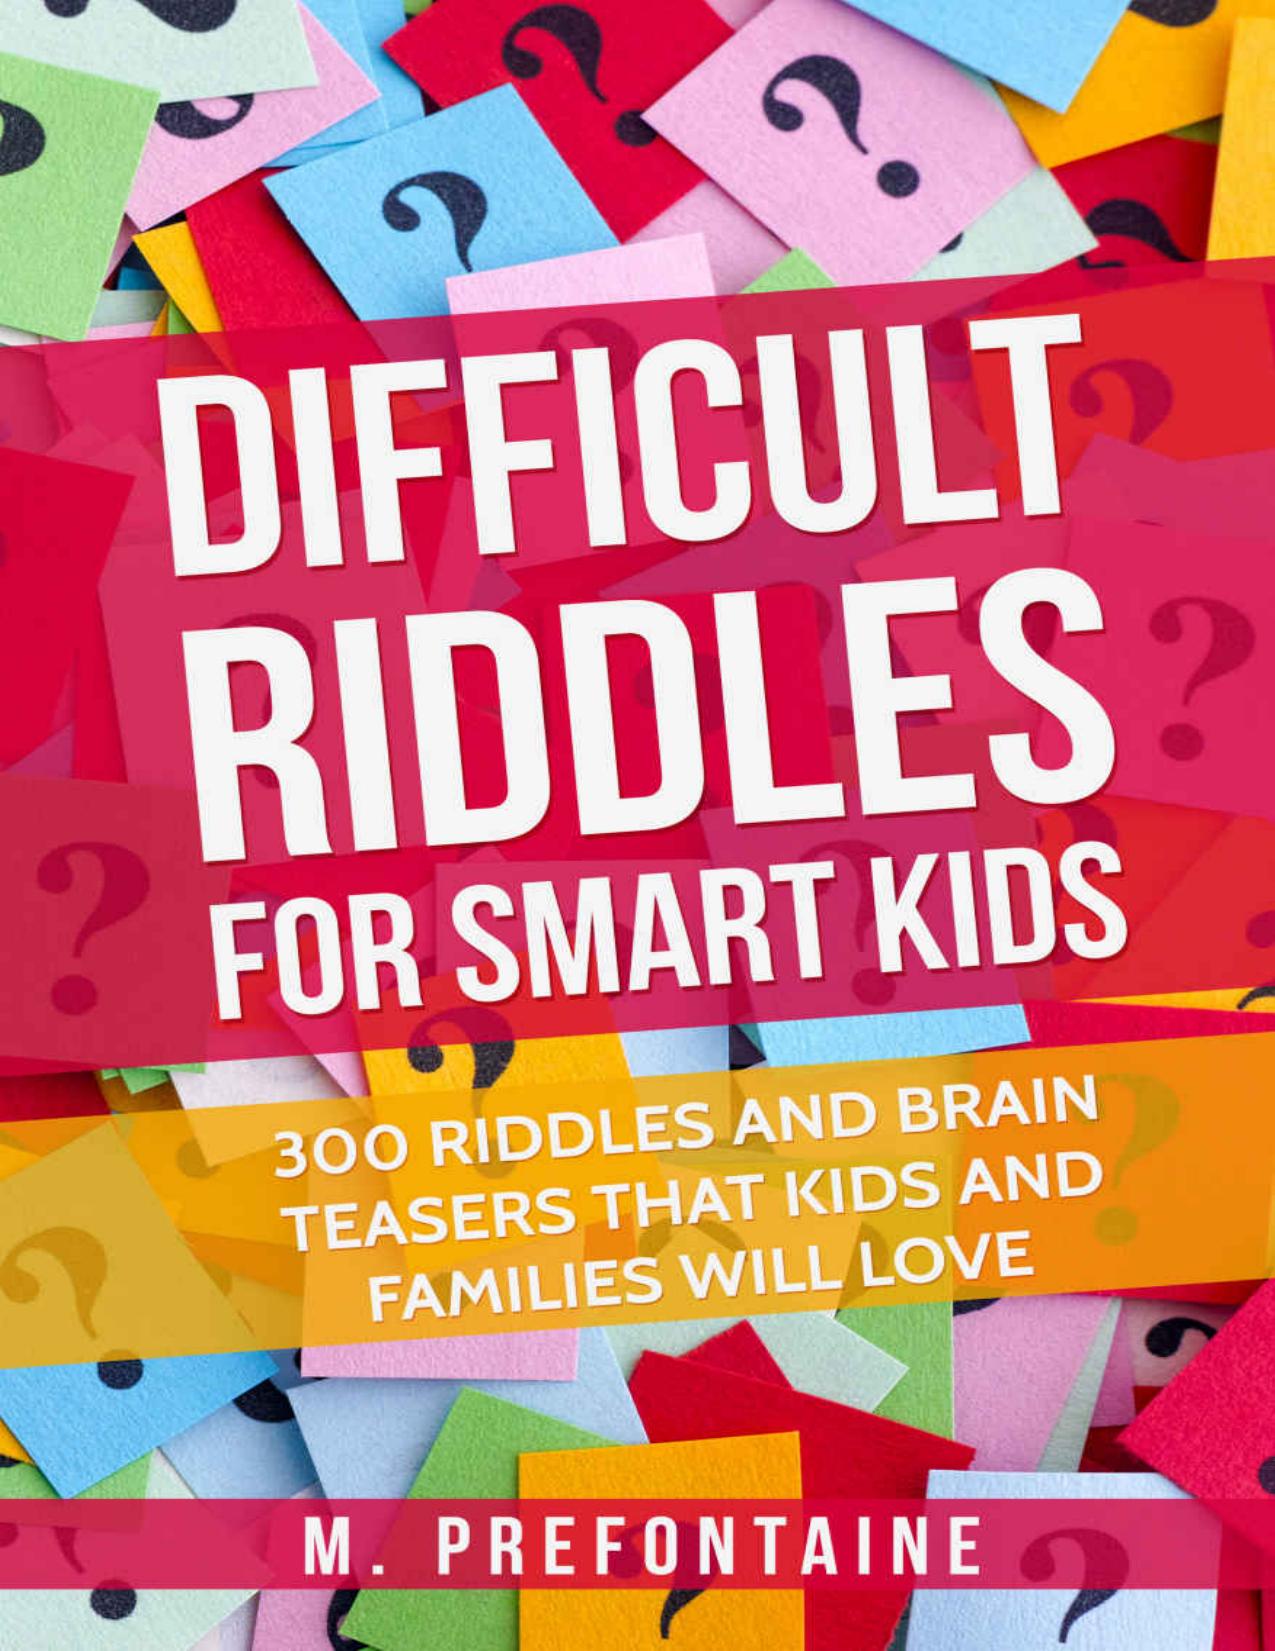 Difficult Riddles For Smart Kids: 300 Difficult Riddles And Brain Teasers Families Will Love (Books for Smart Kids Book 1) by M. Prefontaine